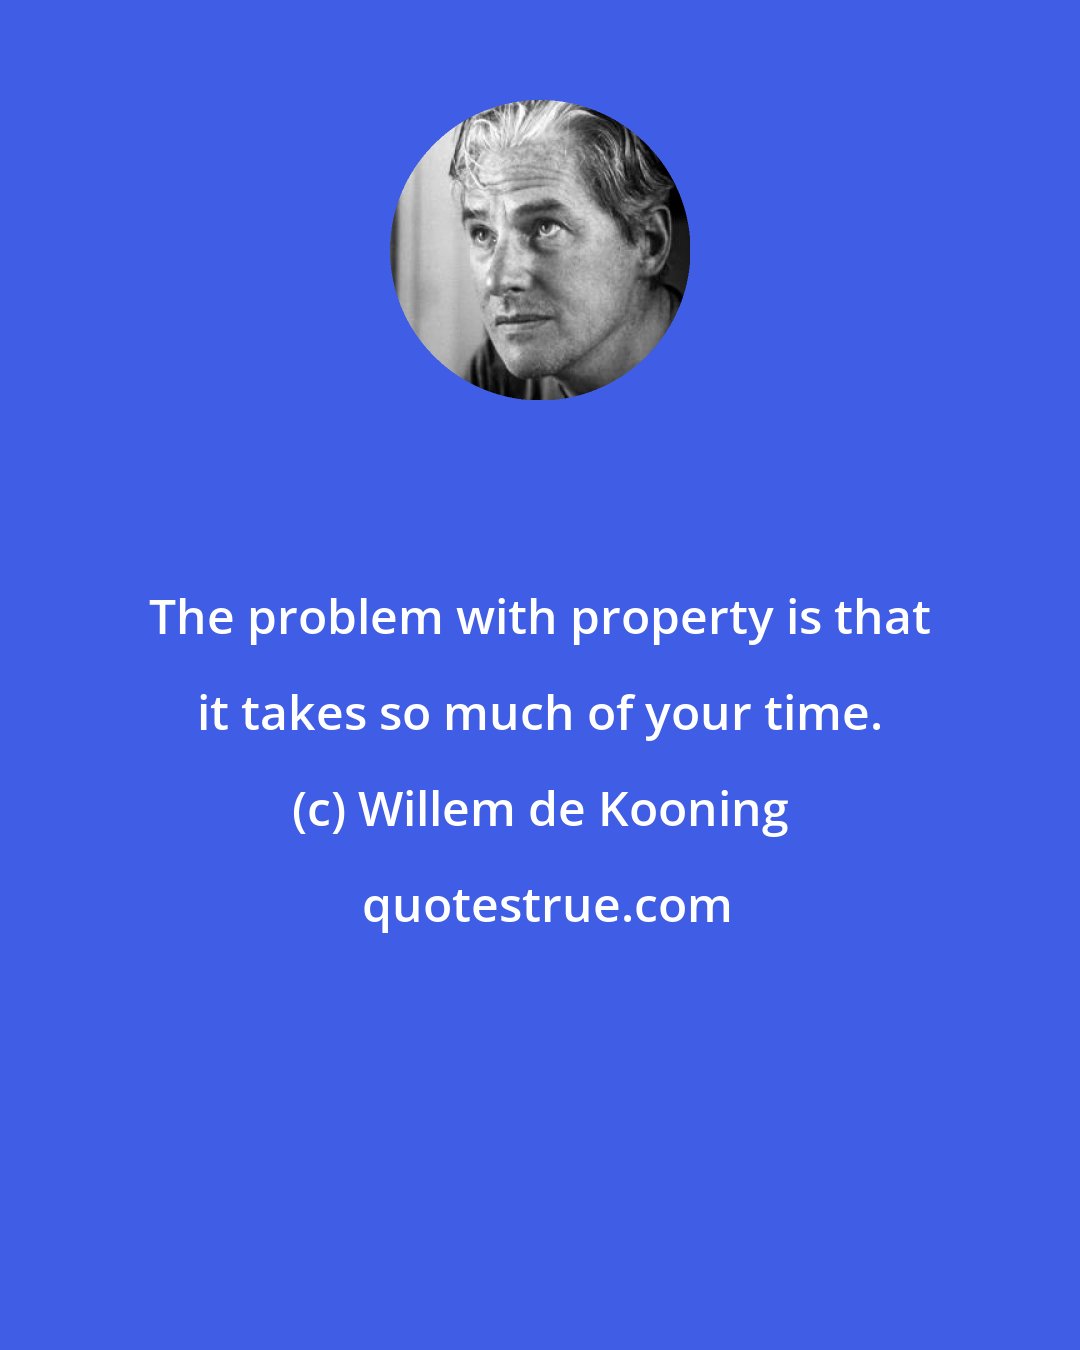 Willem de Kooning: The problem with property is that it takes so much of your time.